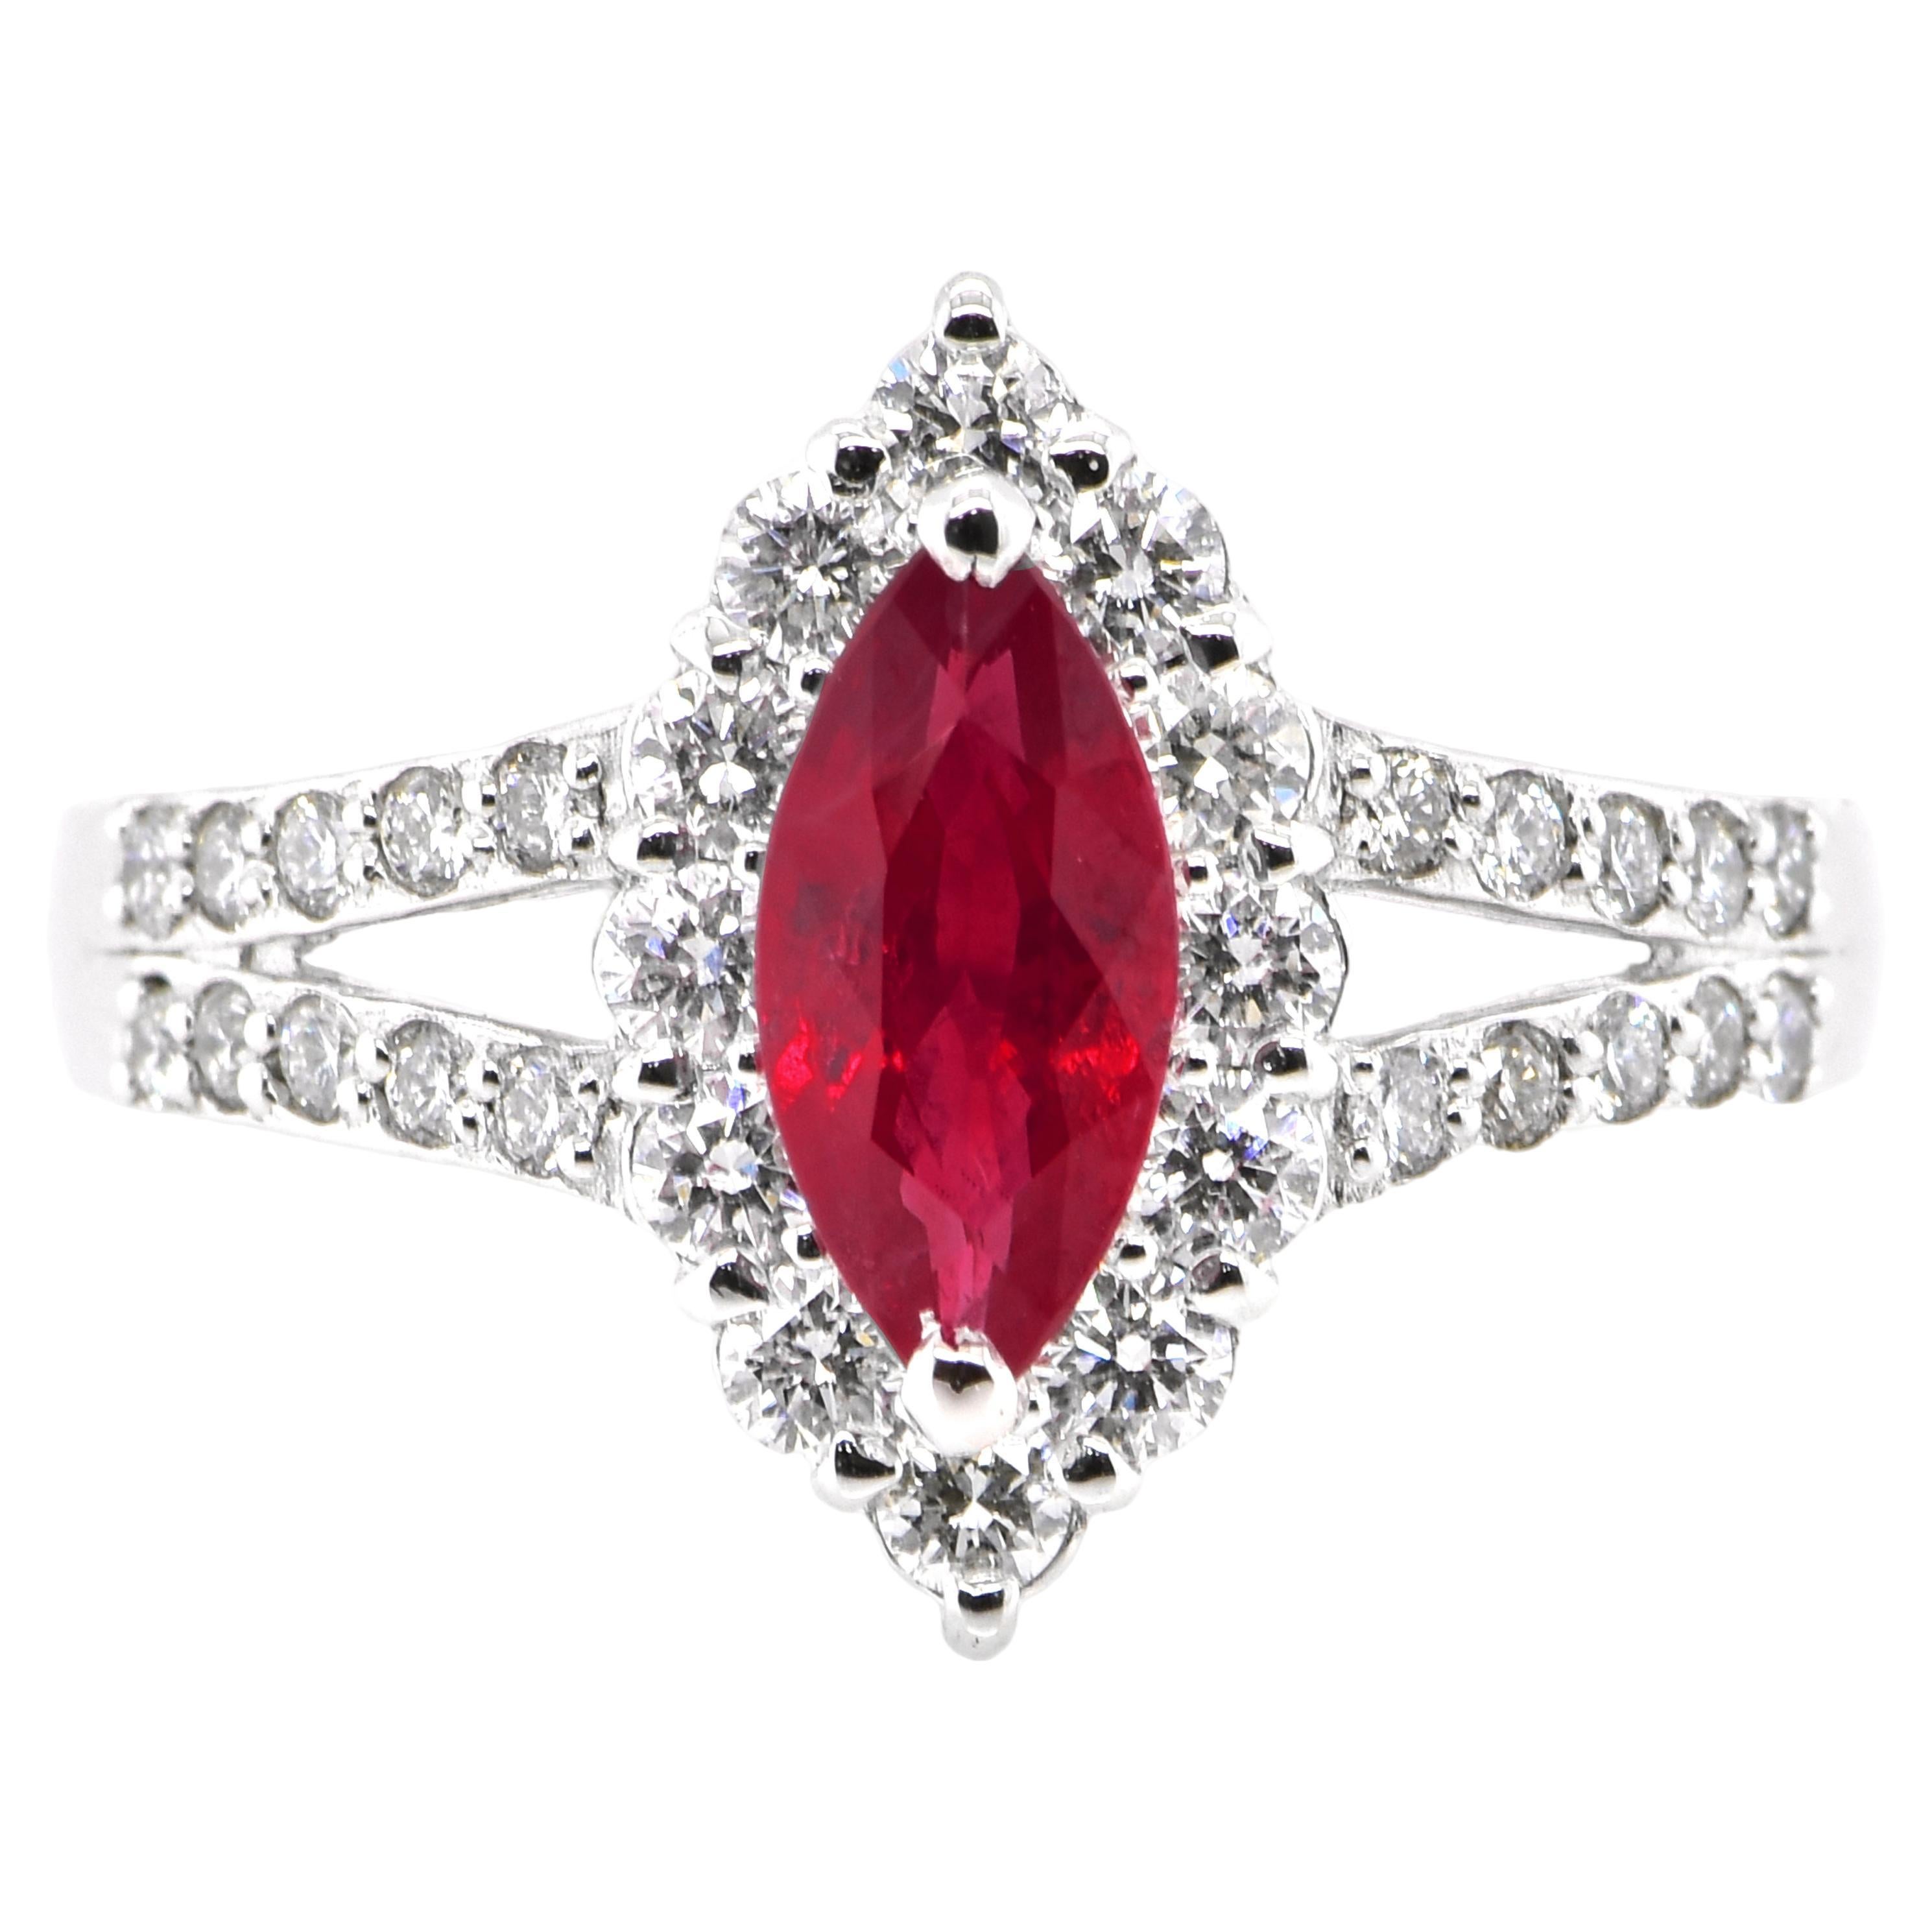 GIA Certified 1.02 Carat Burmese, Pigeon's Blood Color Ruby Ring set in Platinum For Sale